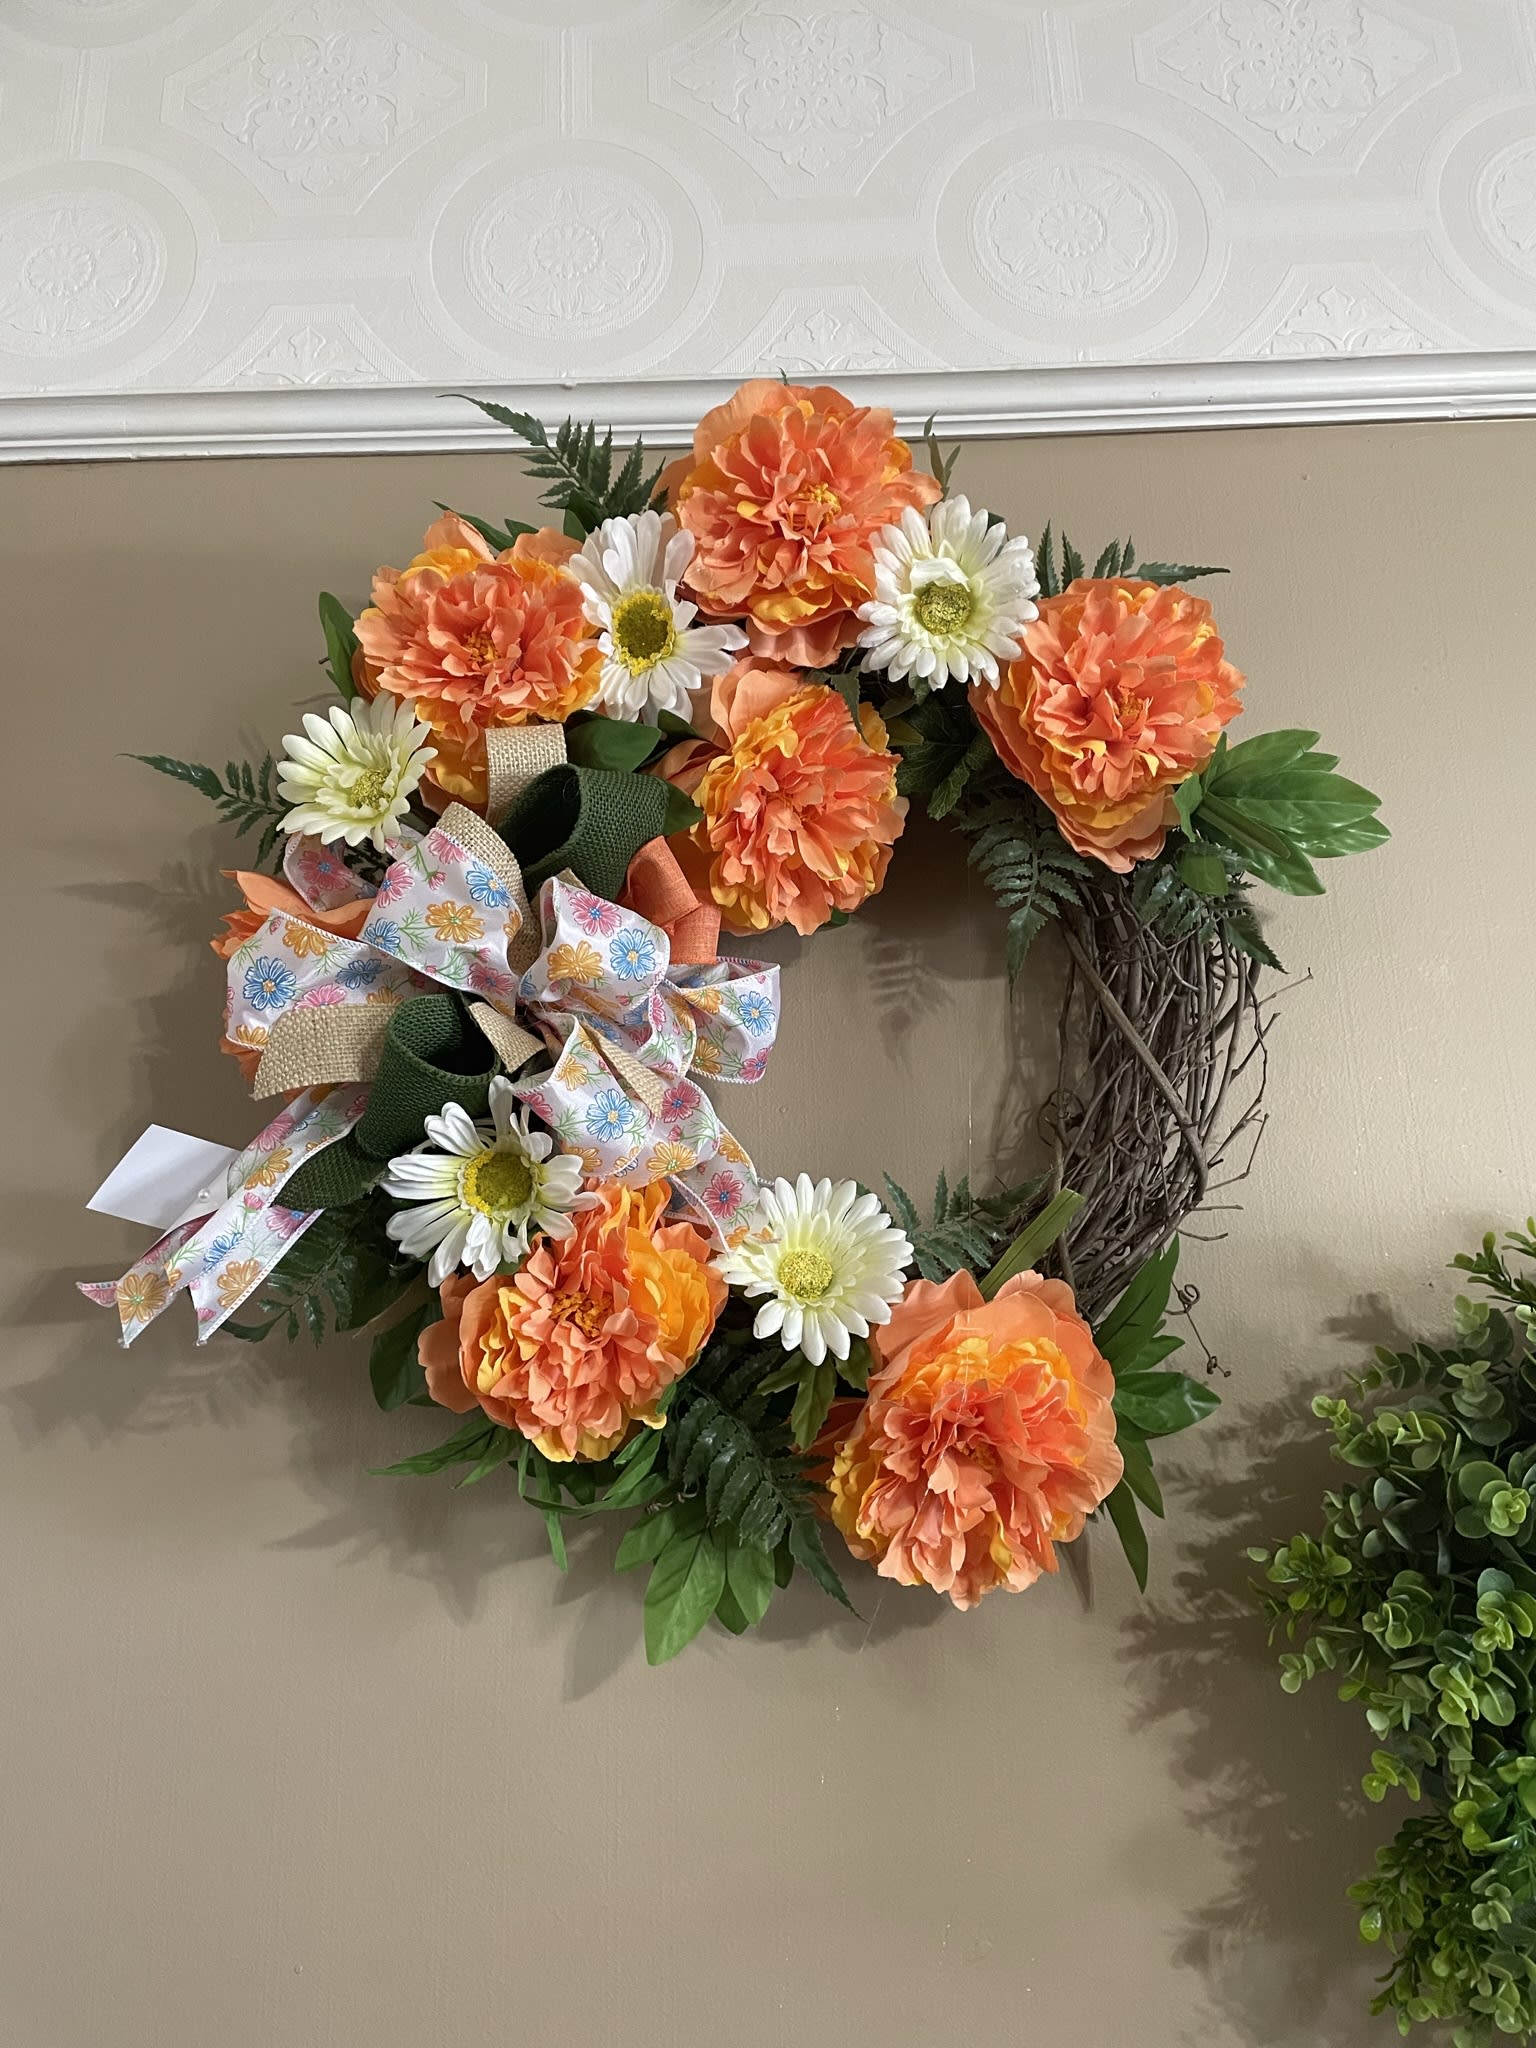 Bright Spring Silk  Grapevine Wreath  - A grapevine wreath completely covered in various shades of cream, peach and orange silk flowers,  mixed ribbon and green ivy vines.